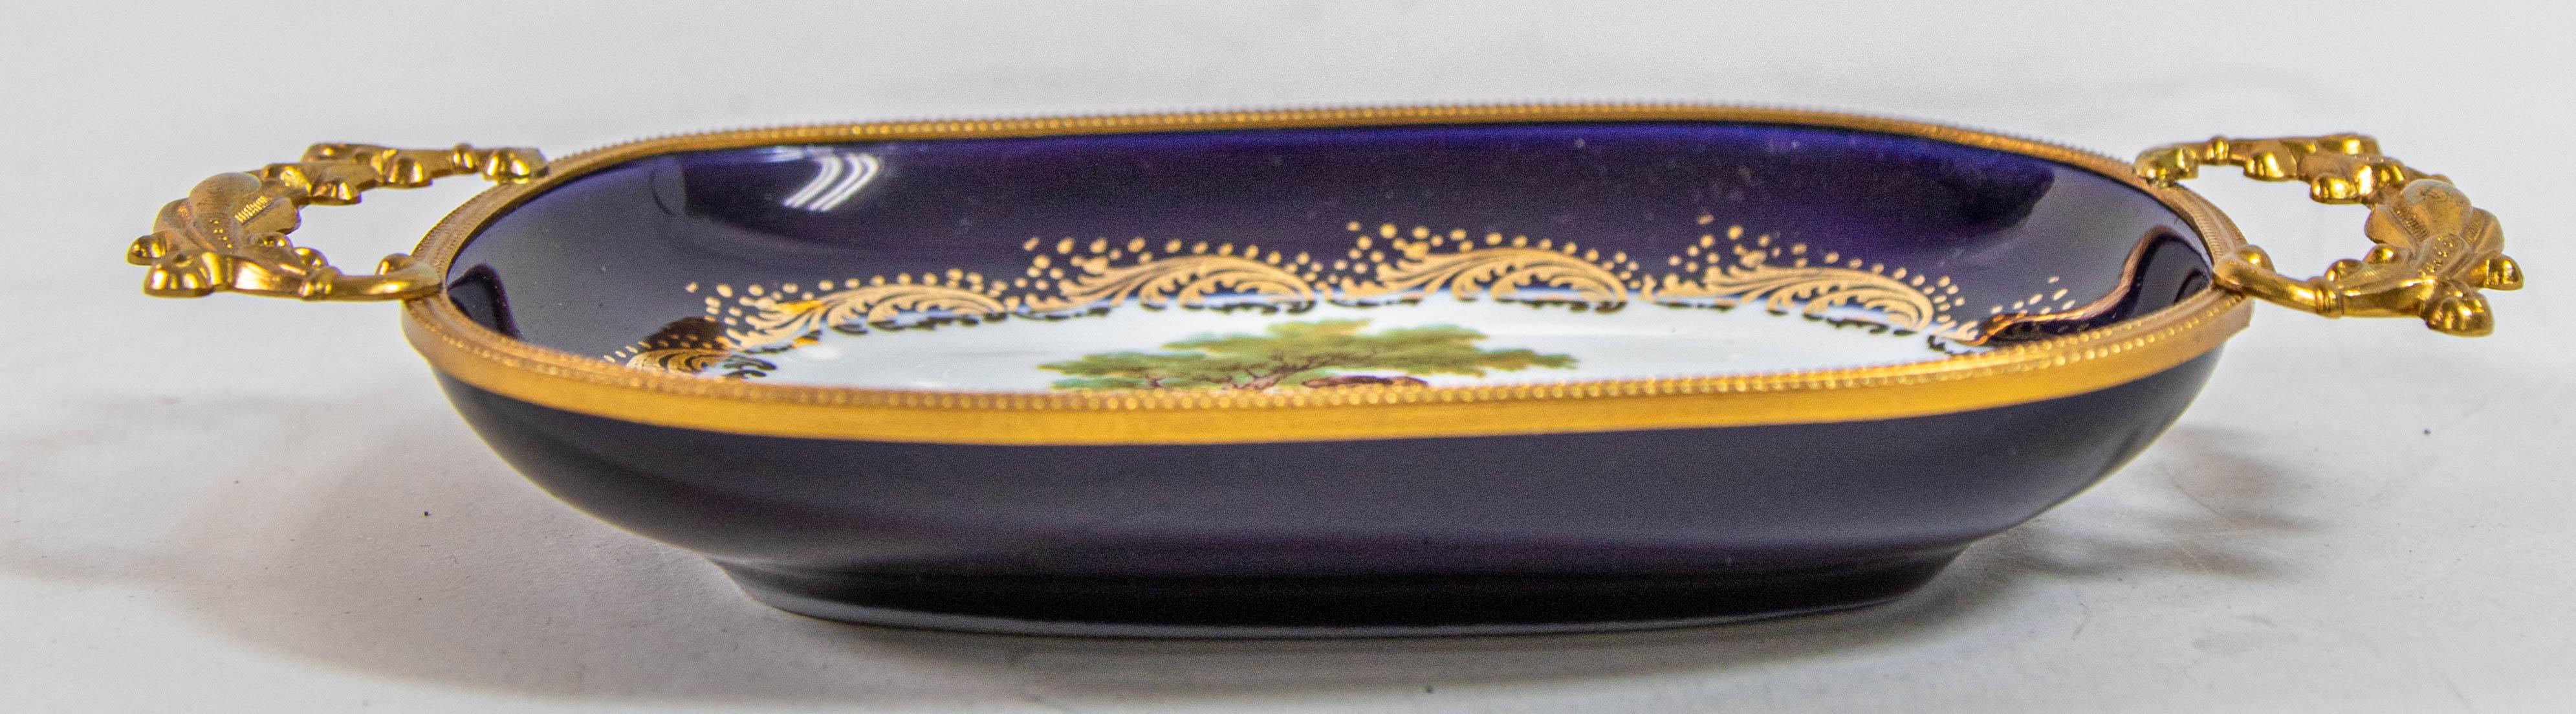 Hand-Crafted Limoges France Dish in Royal Blue with Fragonard Couple and Fine Gold Metal Trim For Sale